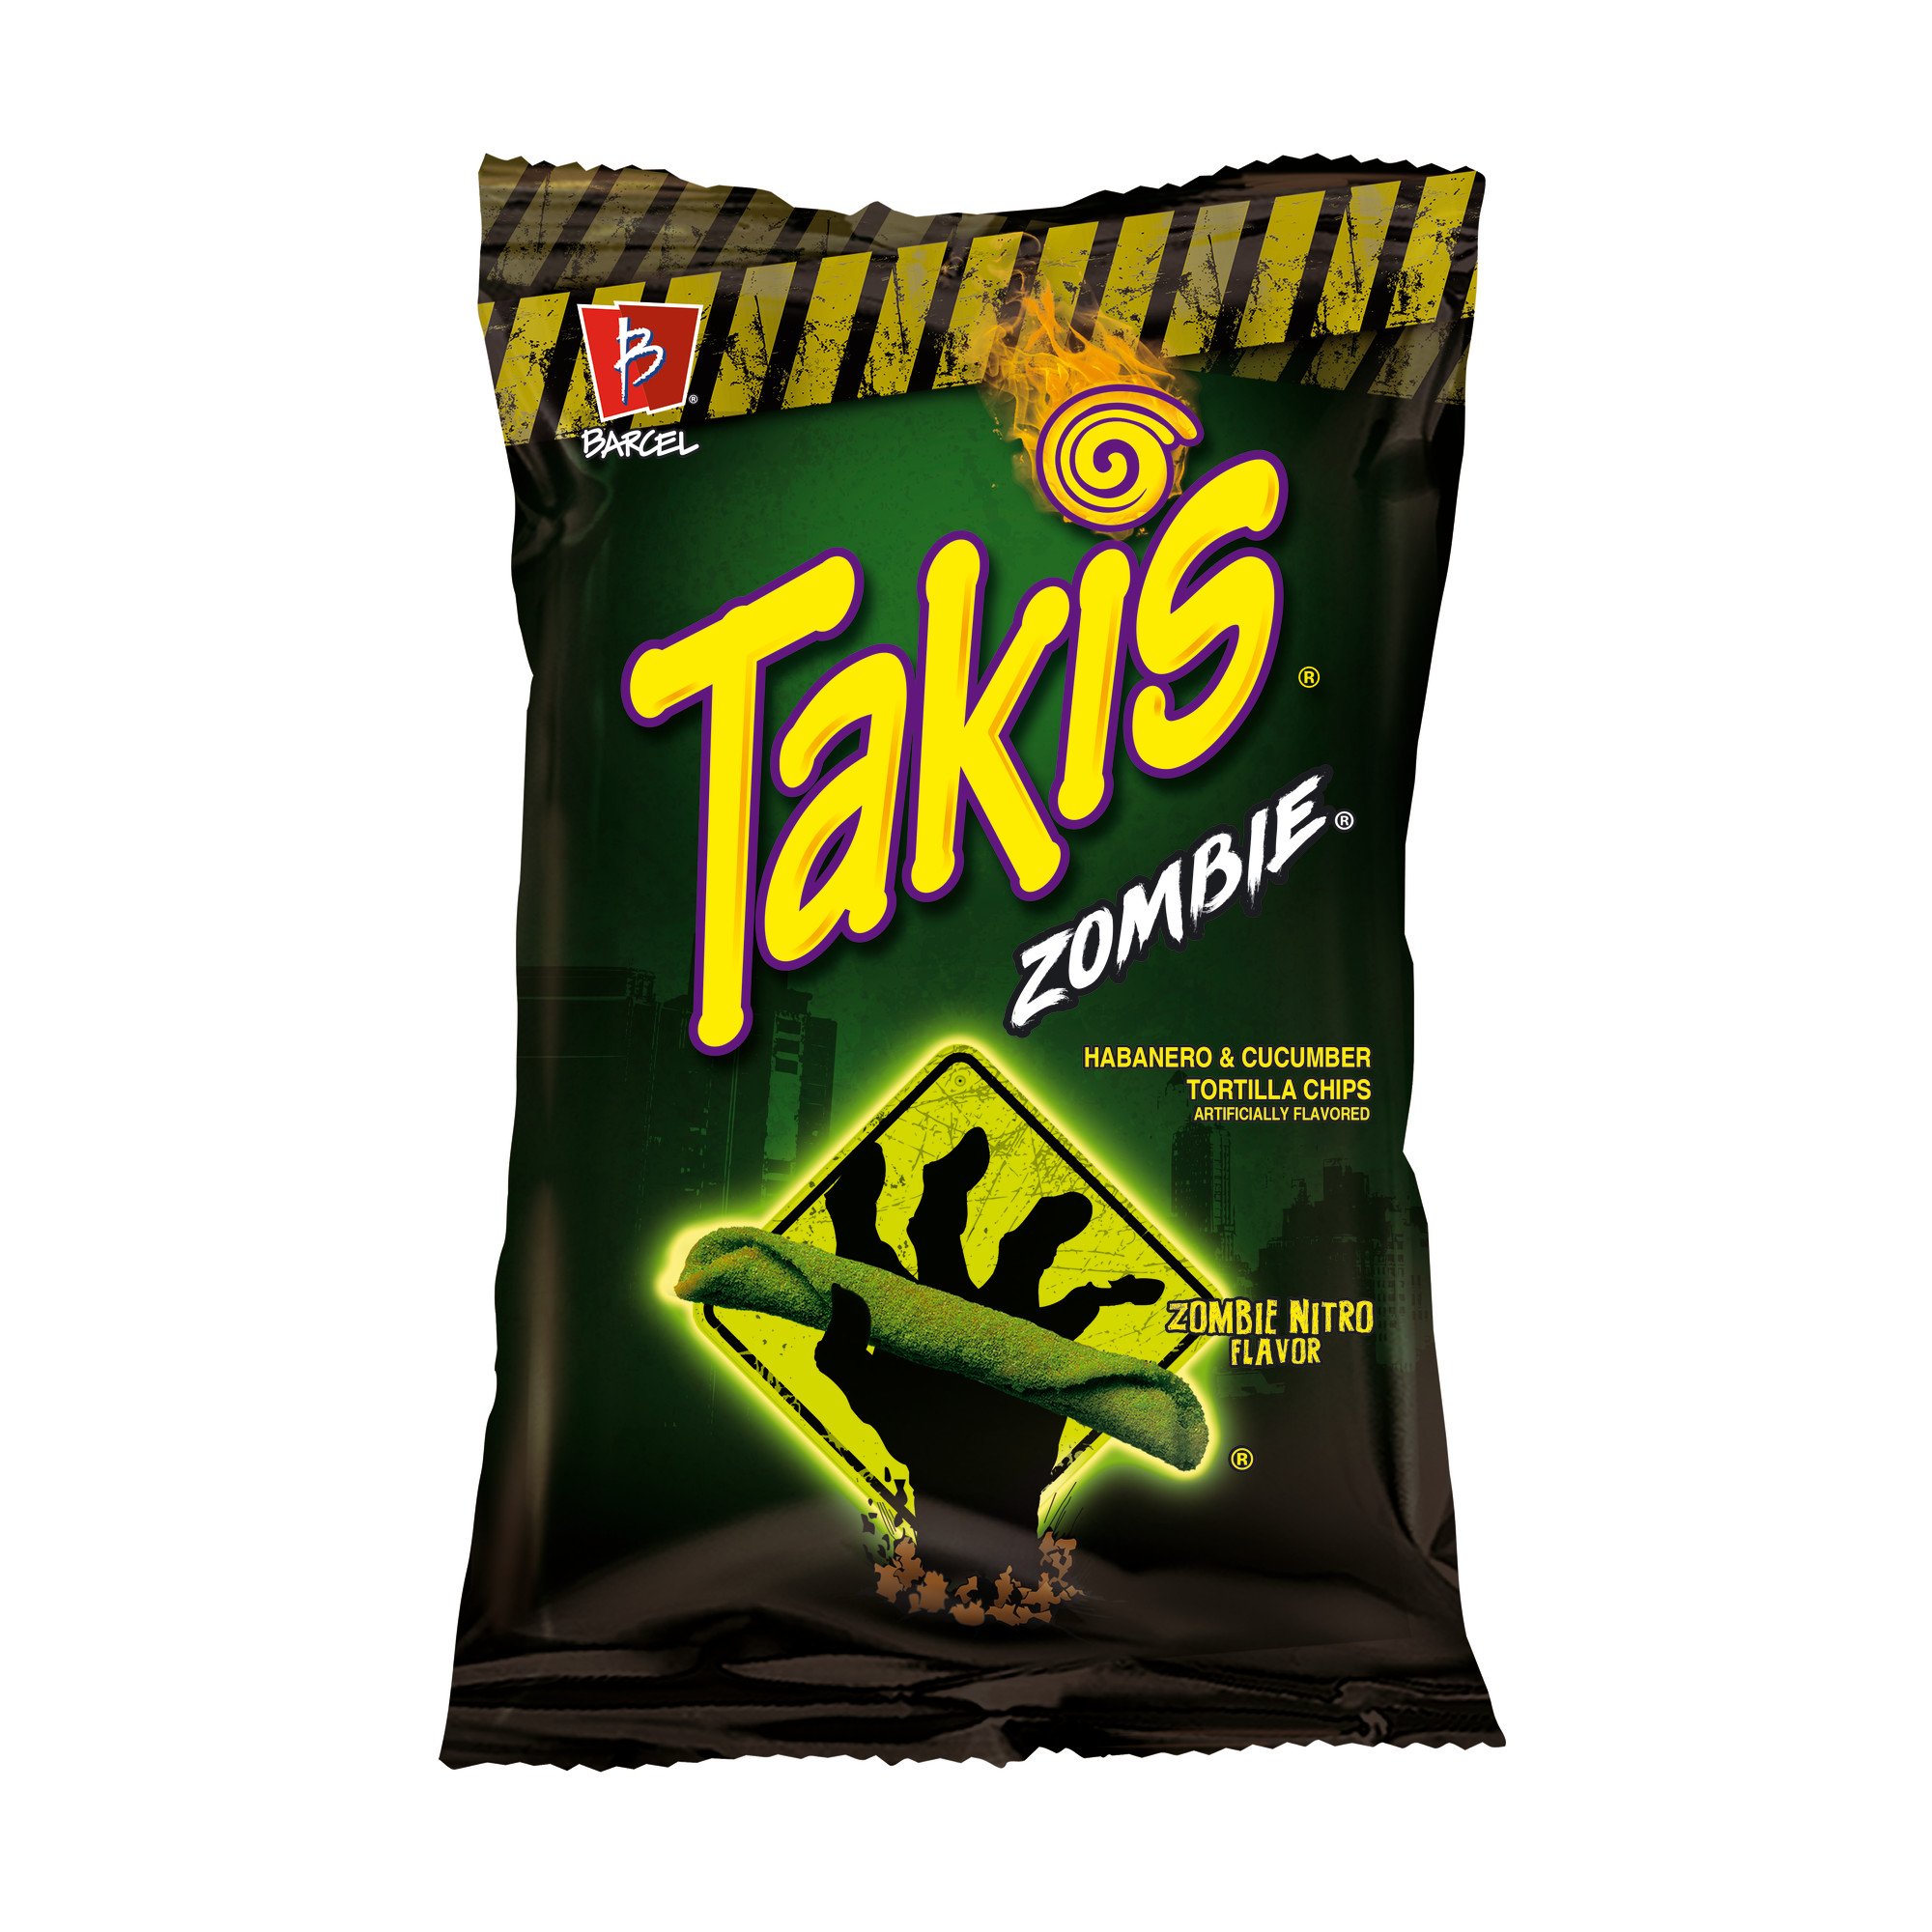 What Makes Zombie Takis Special?